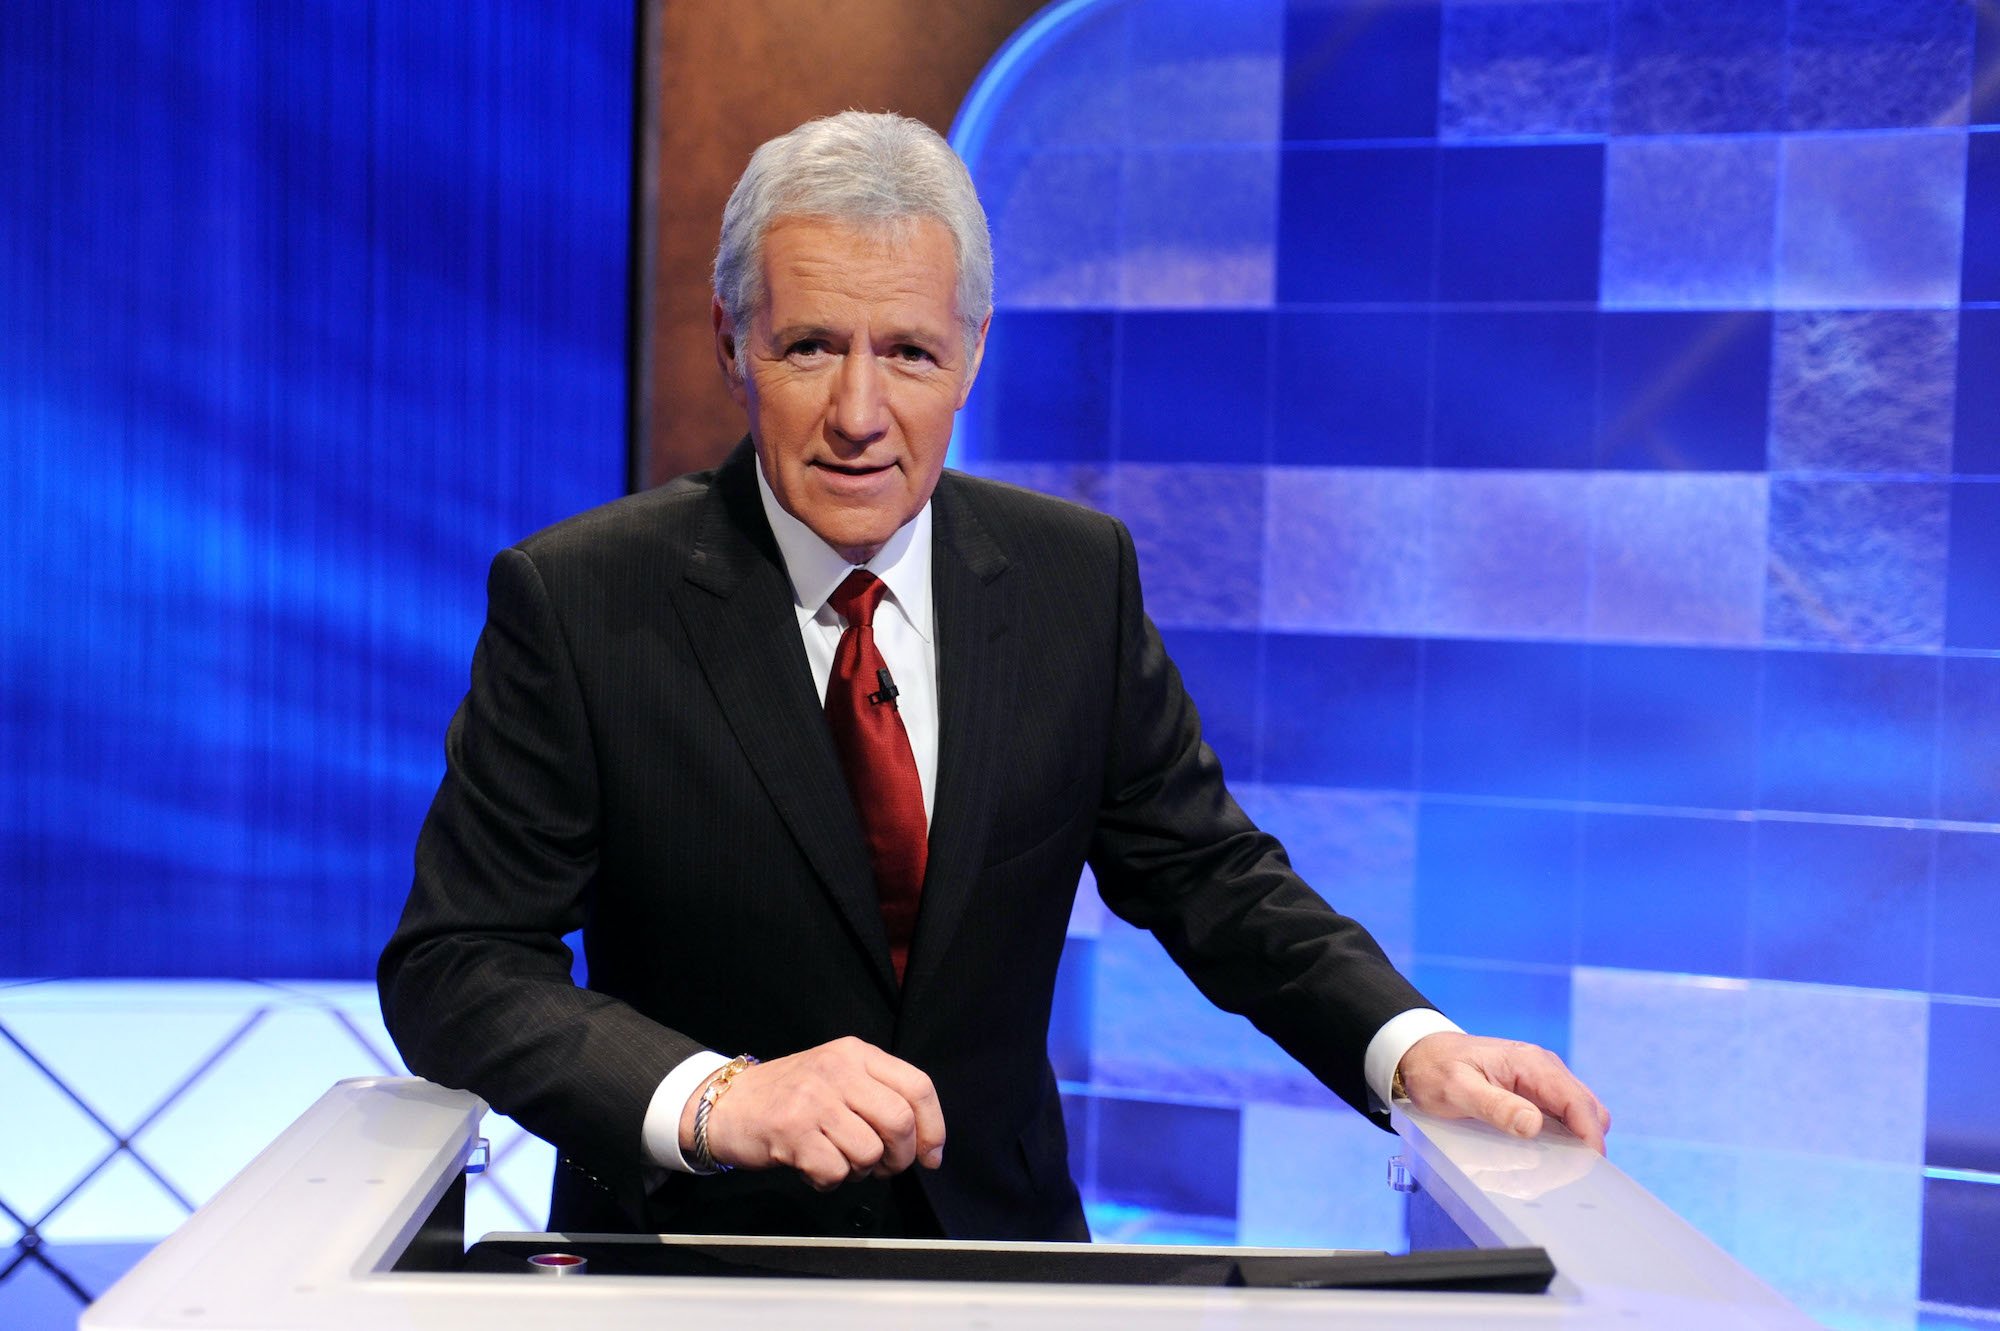 Alex Trebek at the 2001 taping of 'Jeopardy!' Million Dollar Celebrity Invitational Tournament